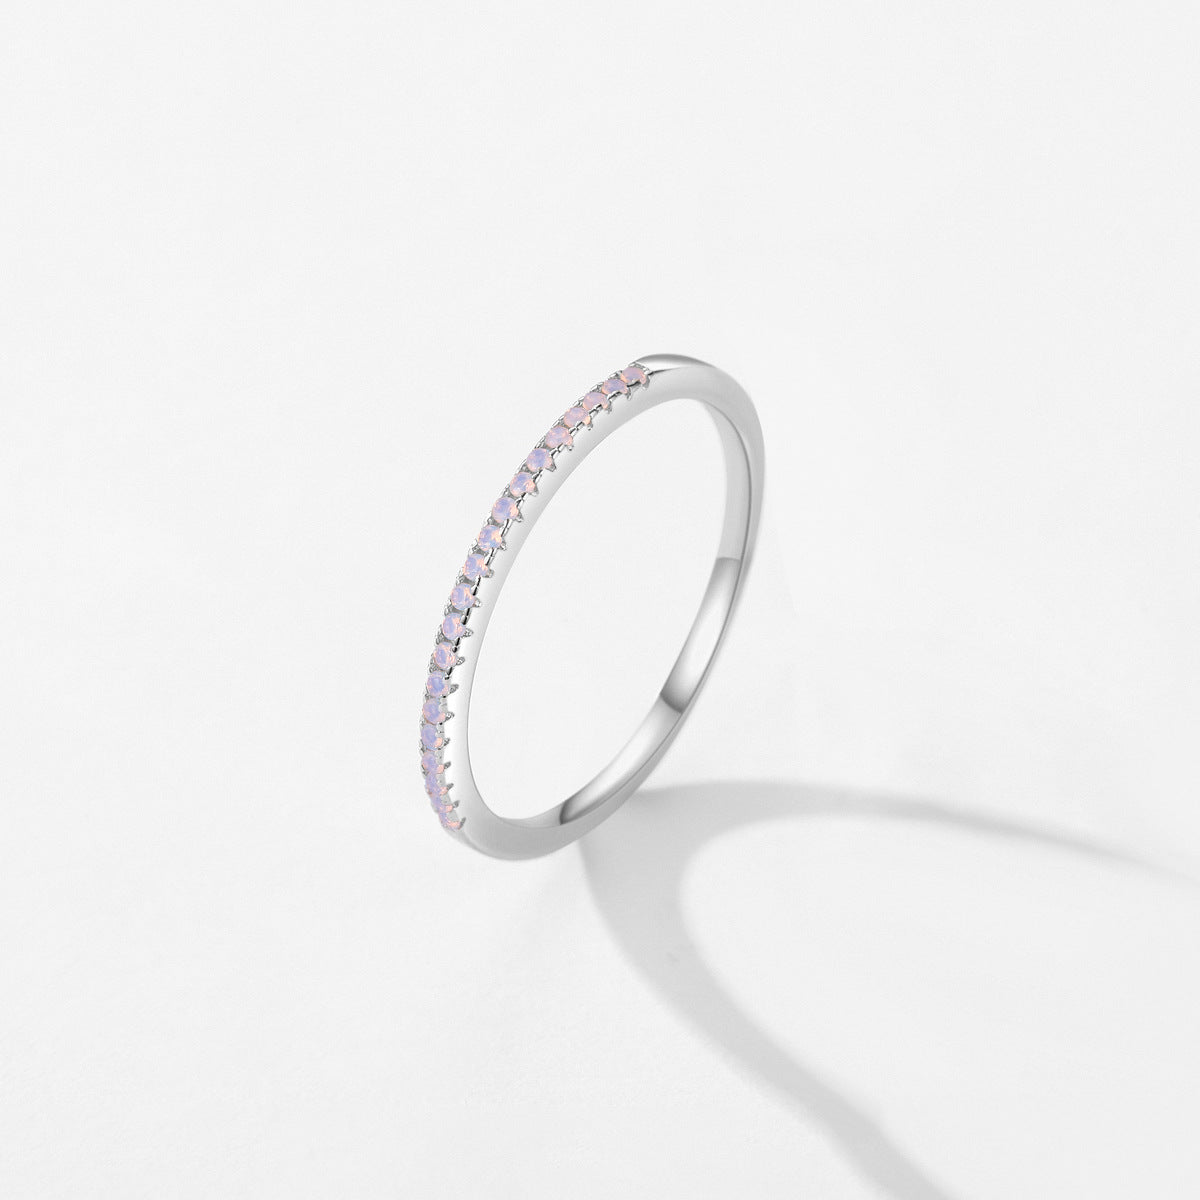 Sterling Silver Ring with Pink Crystal - Niche Design for Fashion-Forward Women